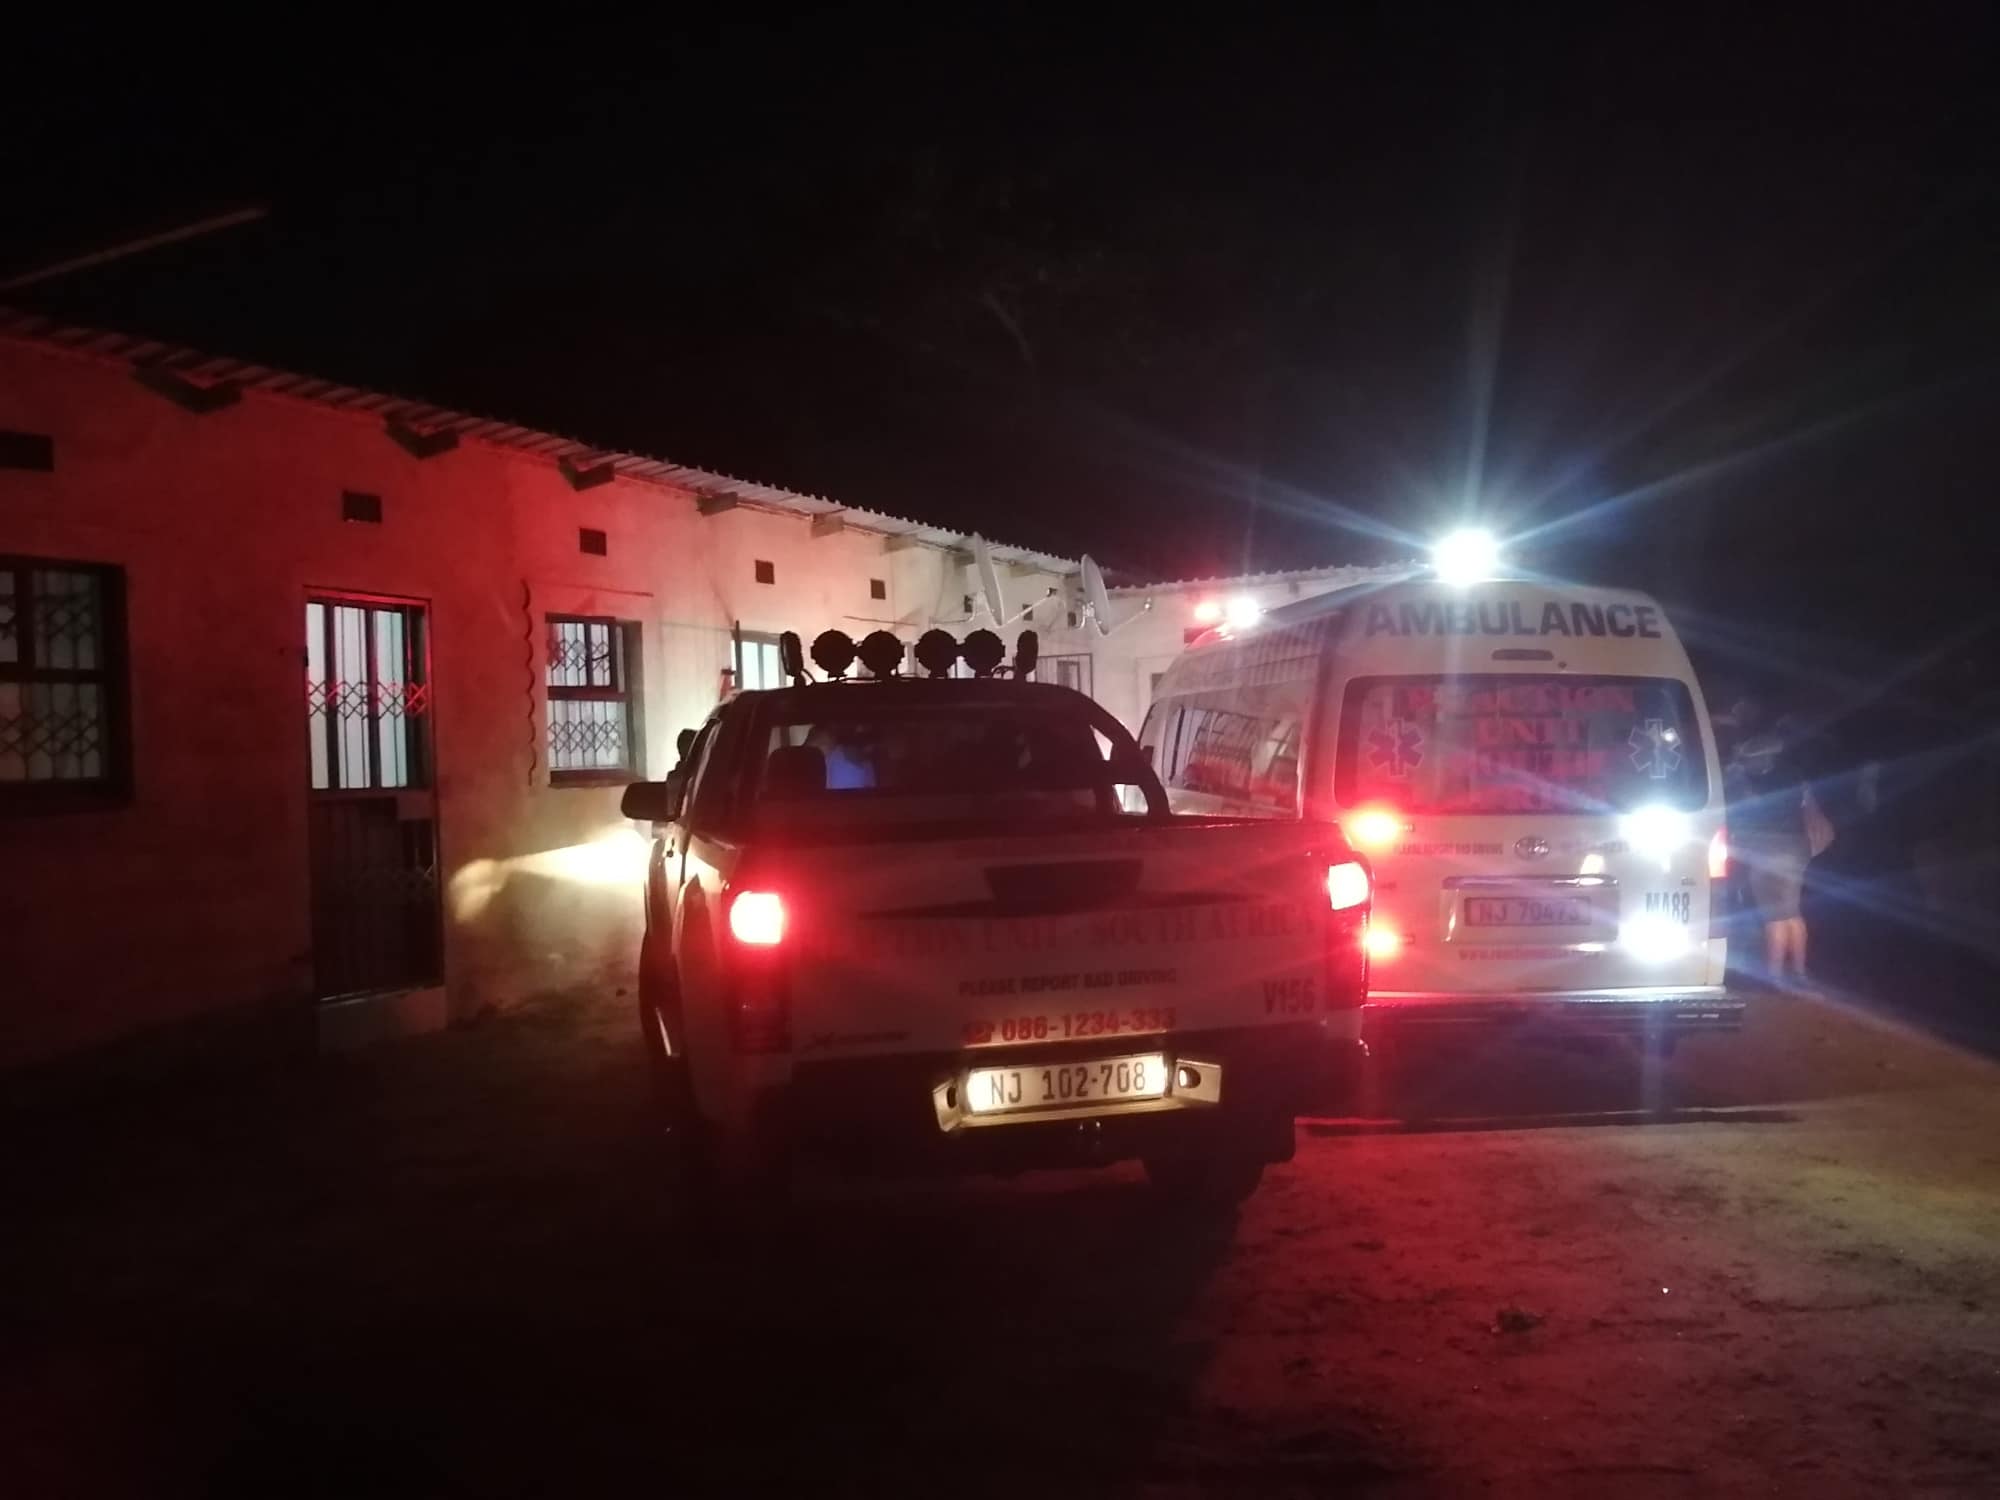 Woman Discovered Deceased In Home: Hazelmere - KZN